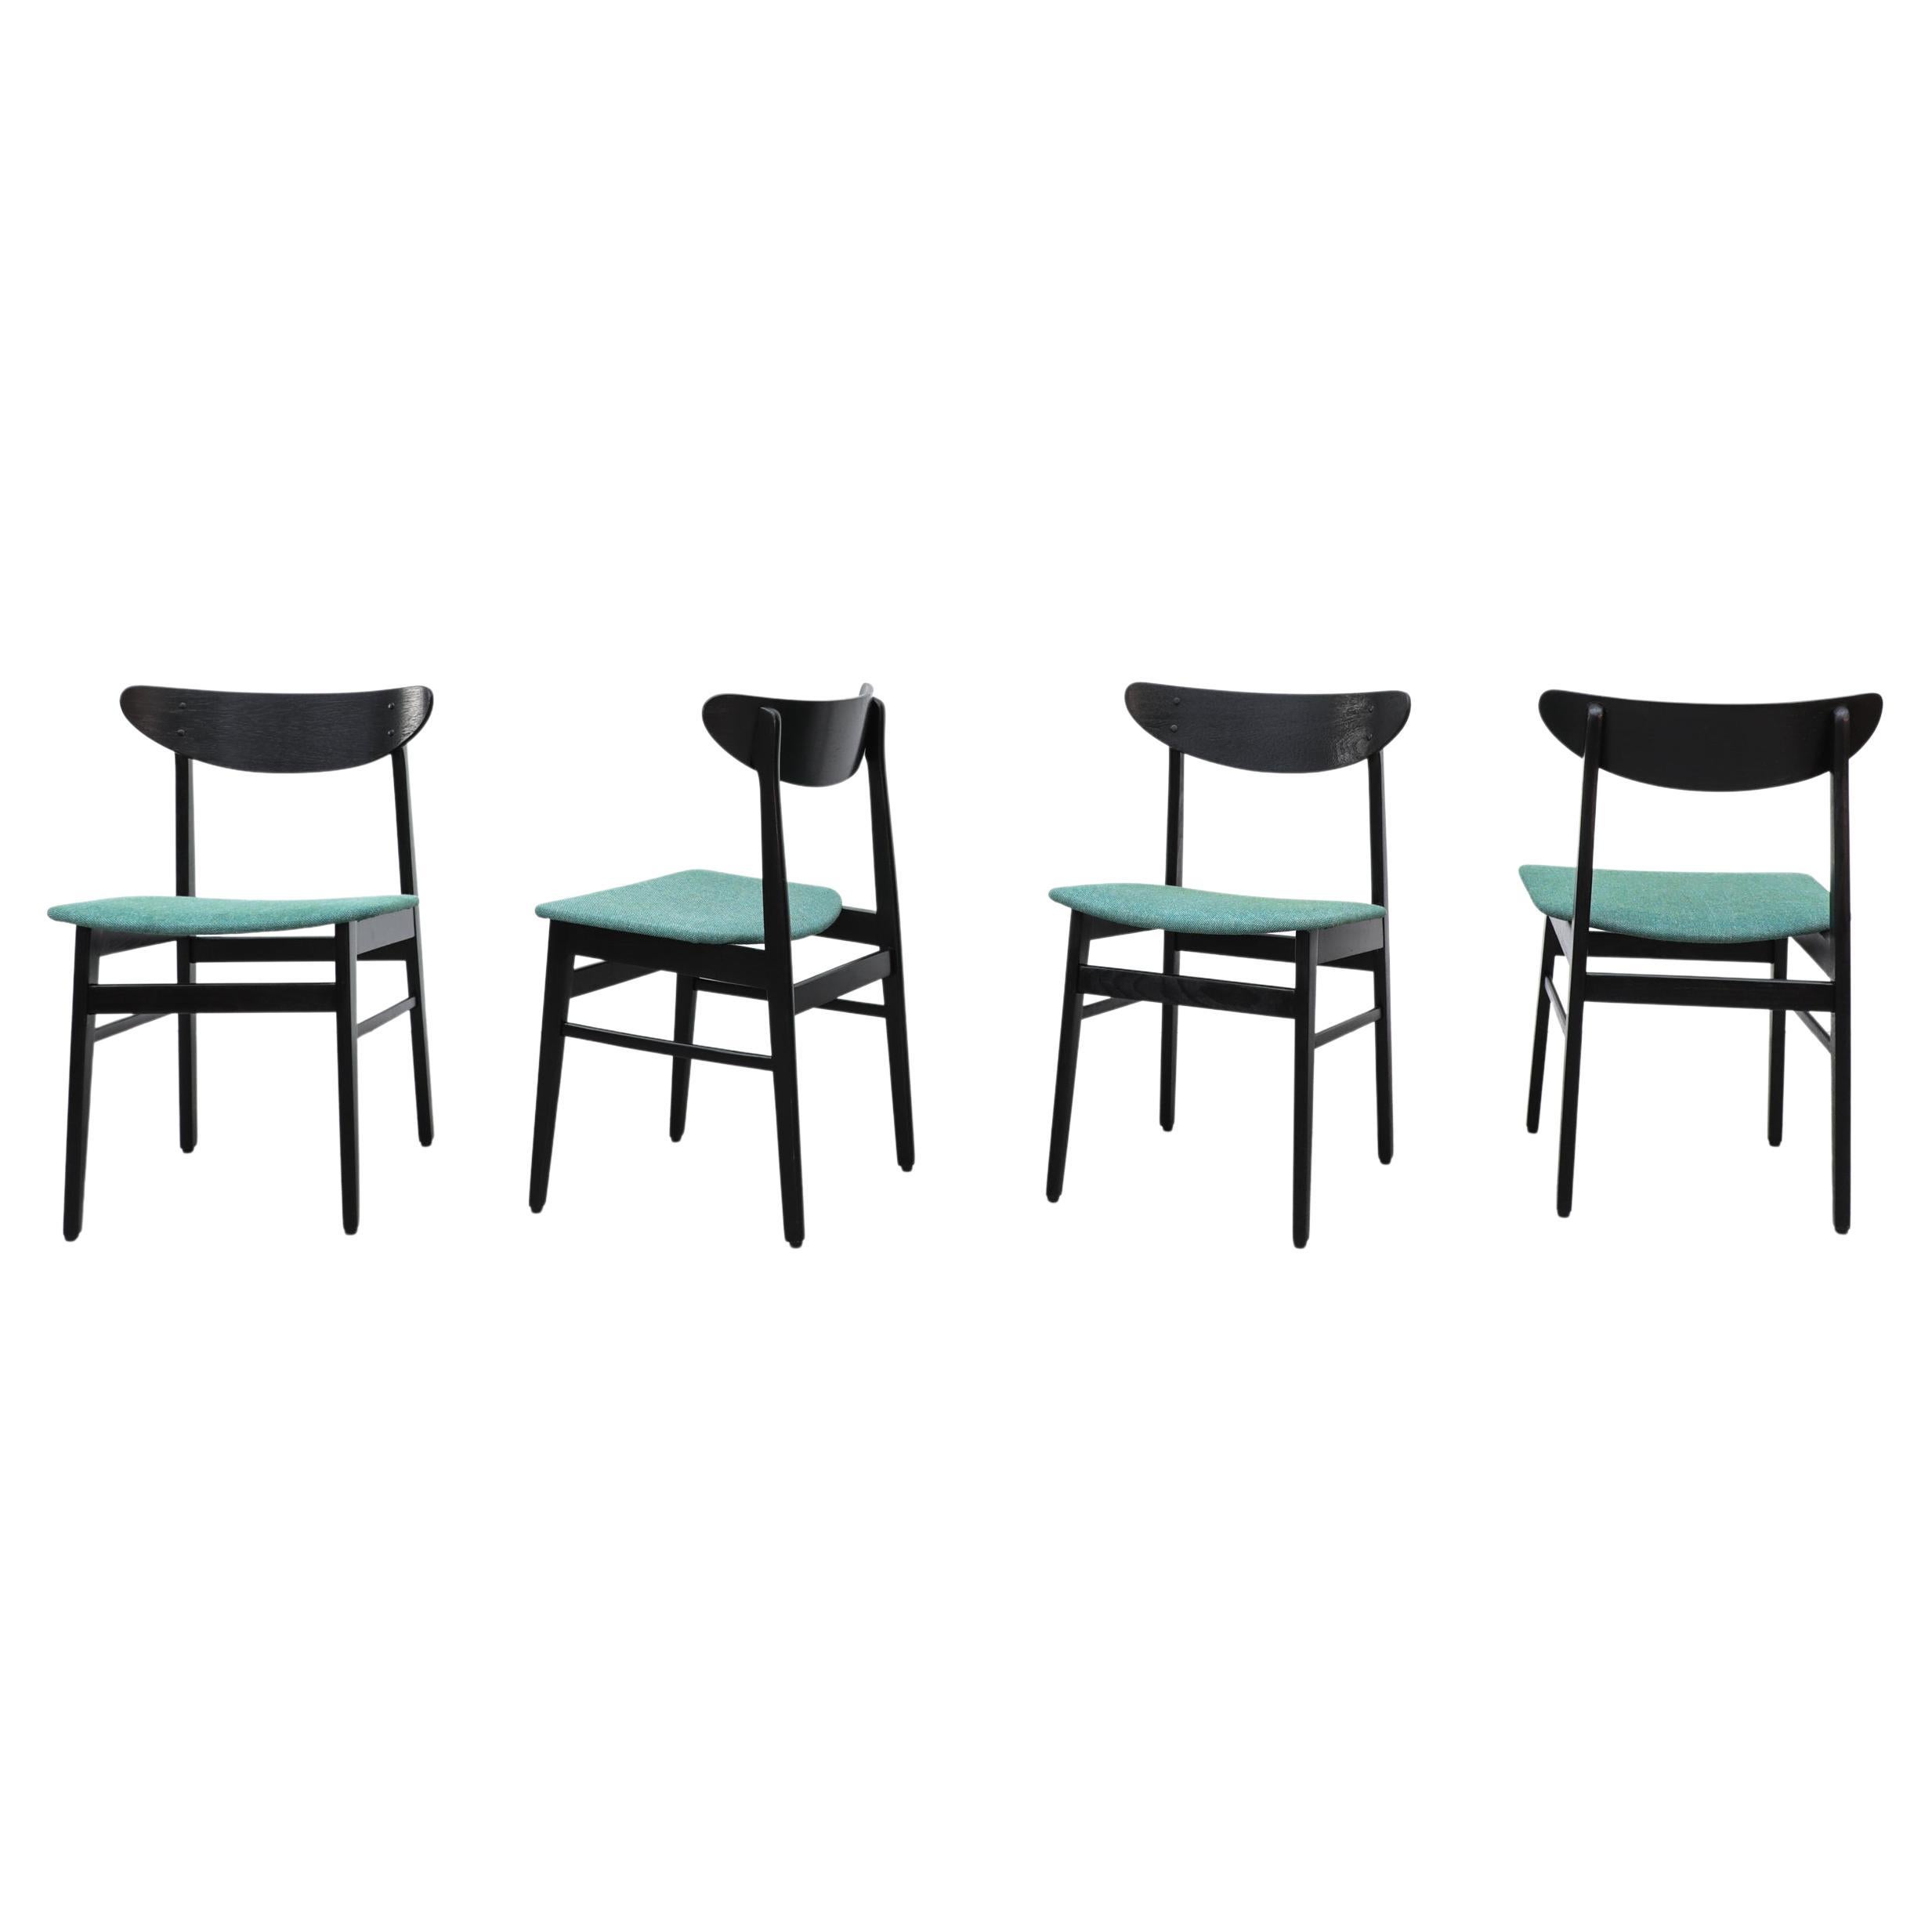 Set of 4 Wegner Style Black Lacquered Dining Chairs by Farstrup with Green Seats For Sale